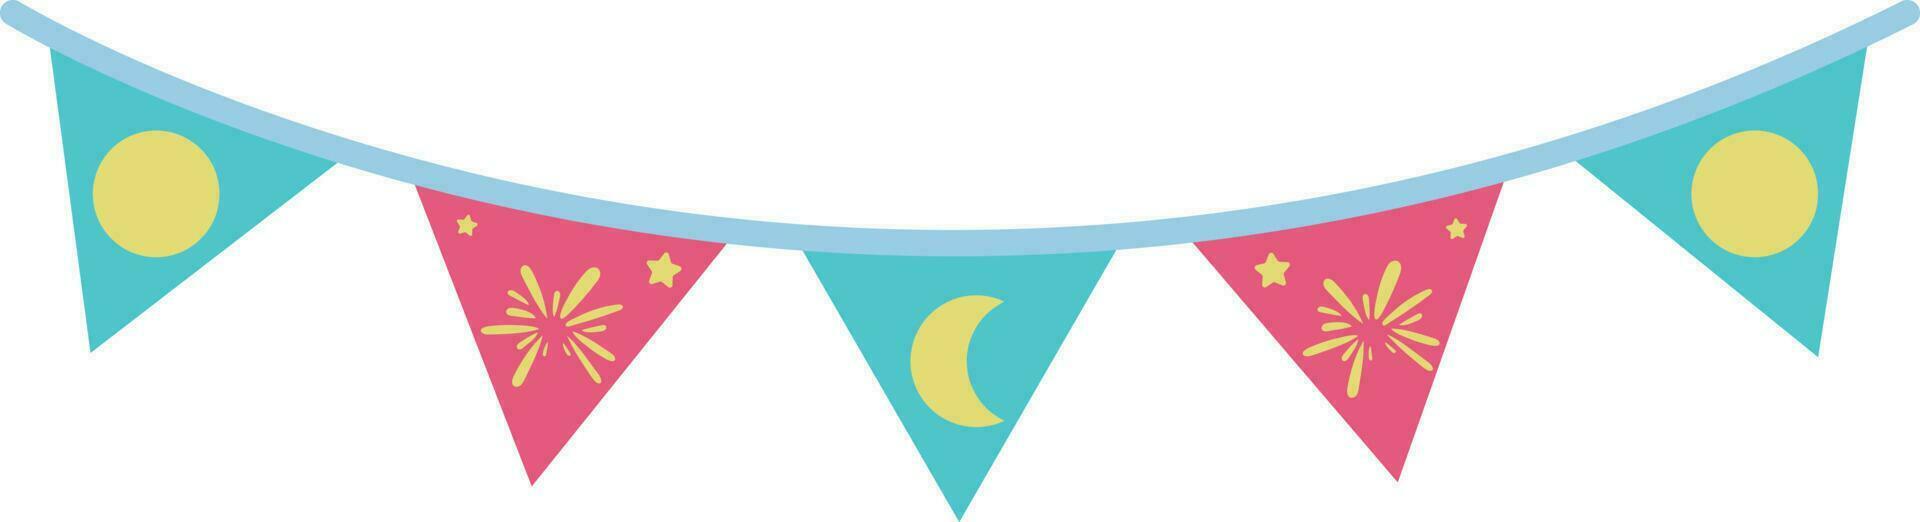 Triangle Colorful Cute Party Flags Illustration Special Style vector